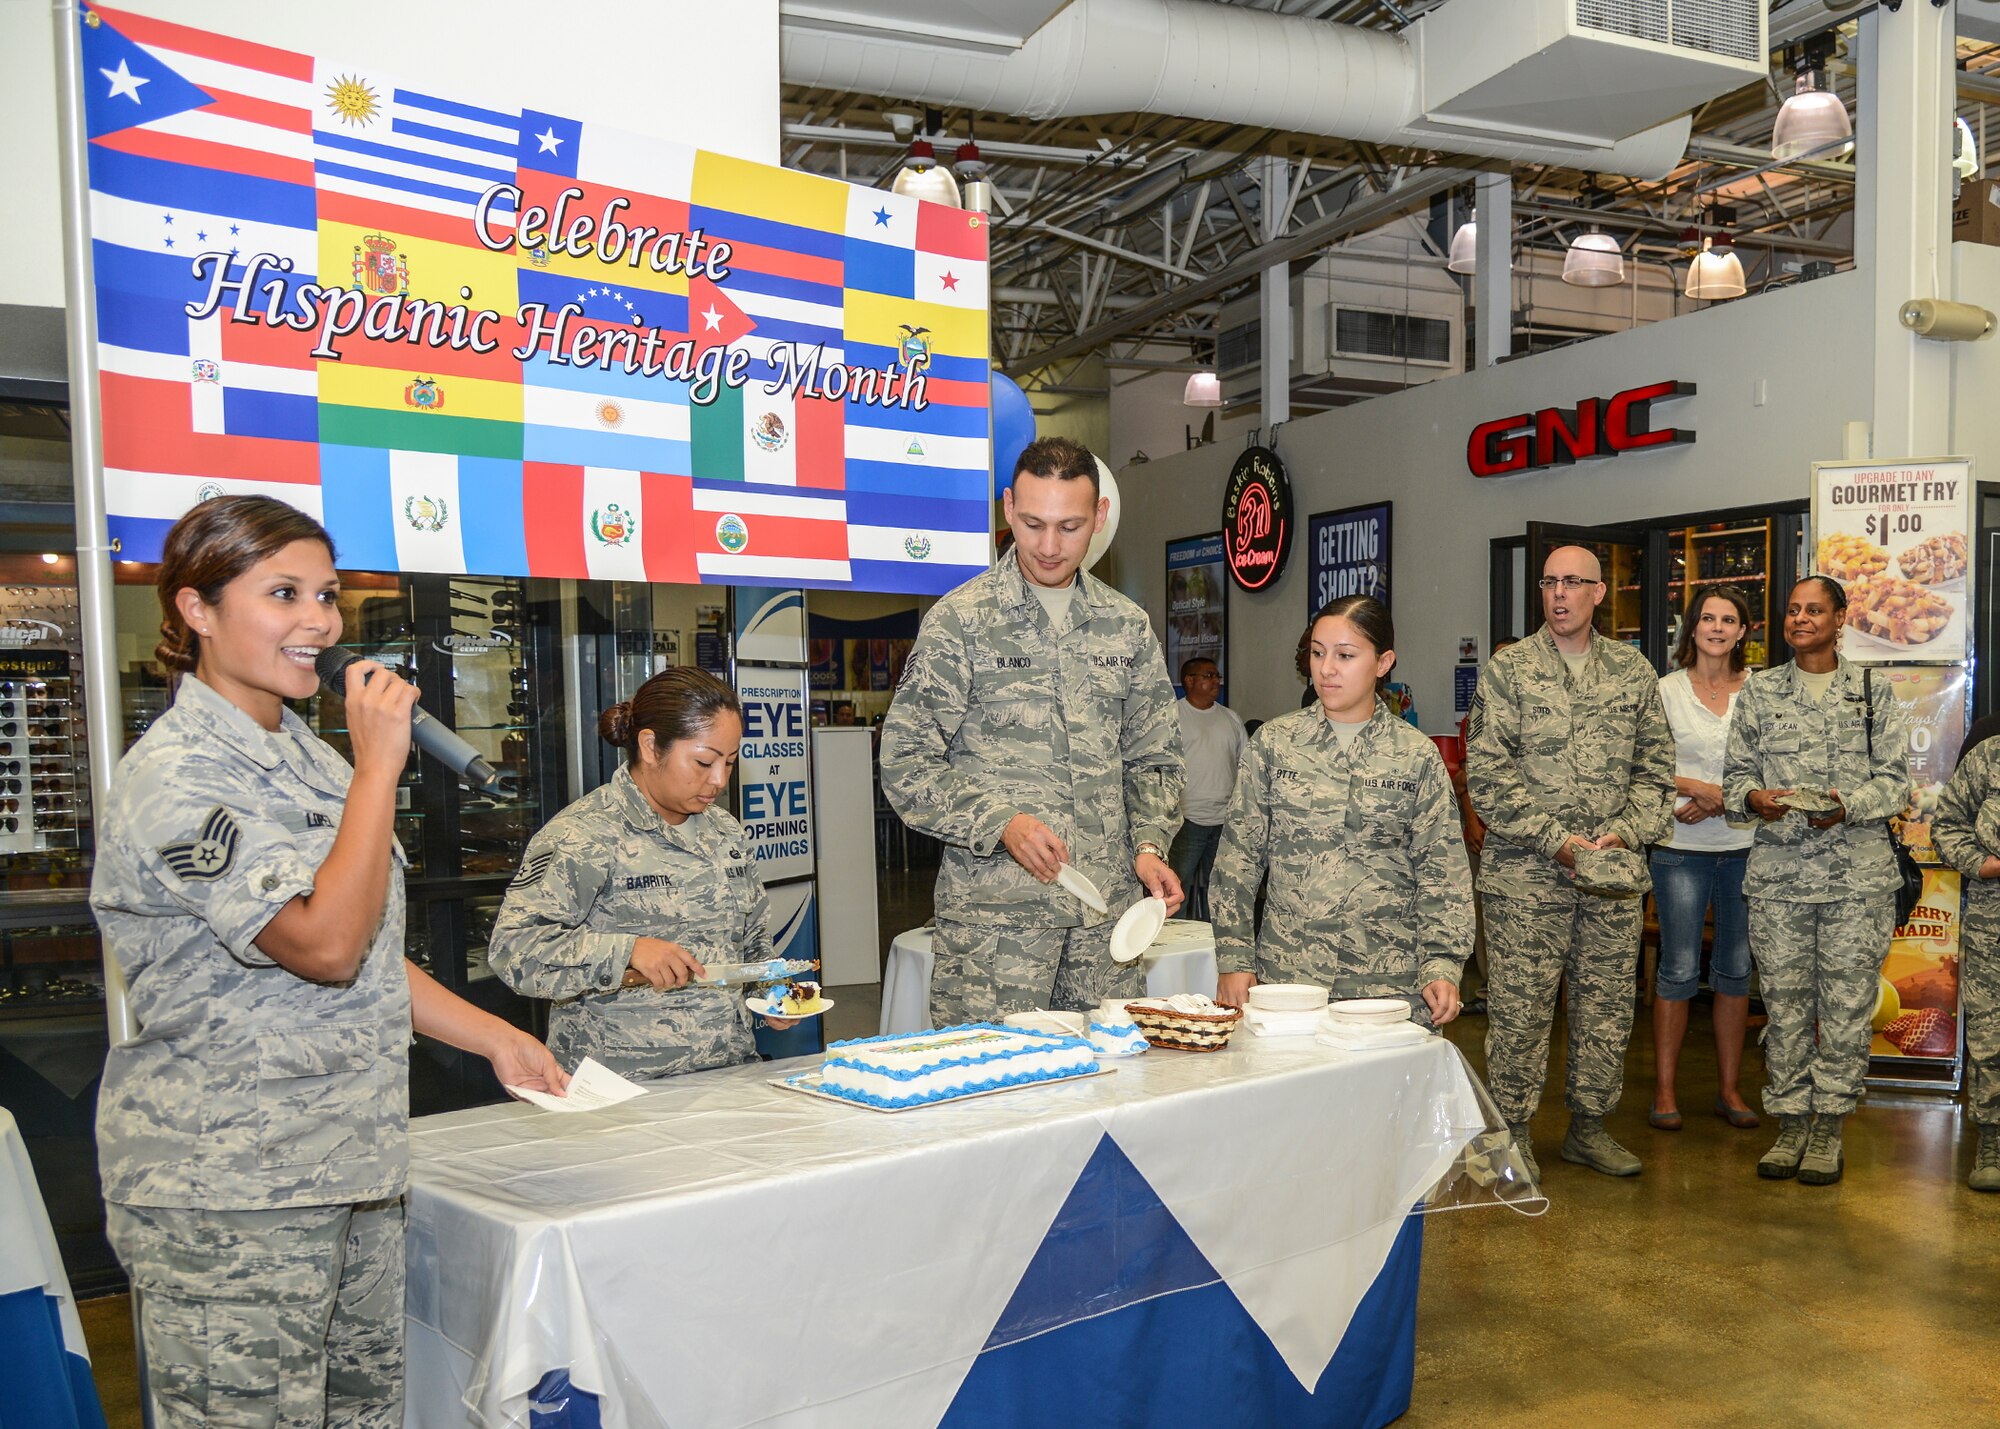 Staff Sgt. DeAnn Lopez (left), 412th Medical Group, introduces the opening ceremony for Hispanic Heritage Month at the Base Exchange Sept. 15. (U.S. Air Force photo by Rebecca Amber)